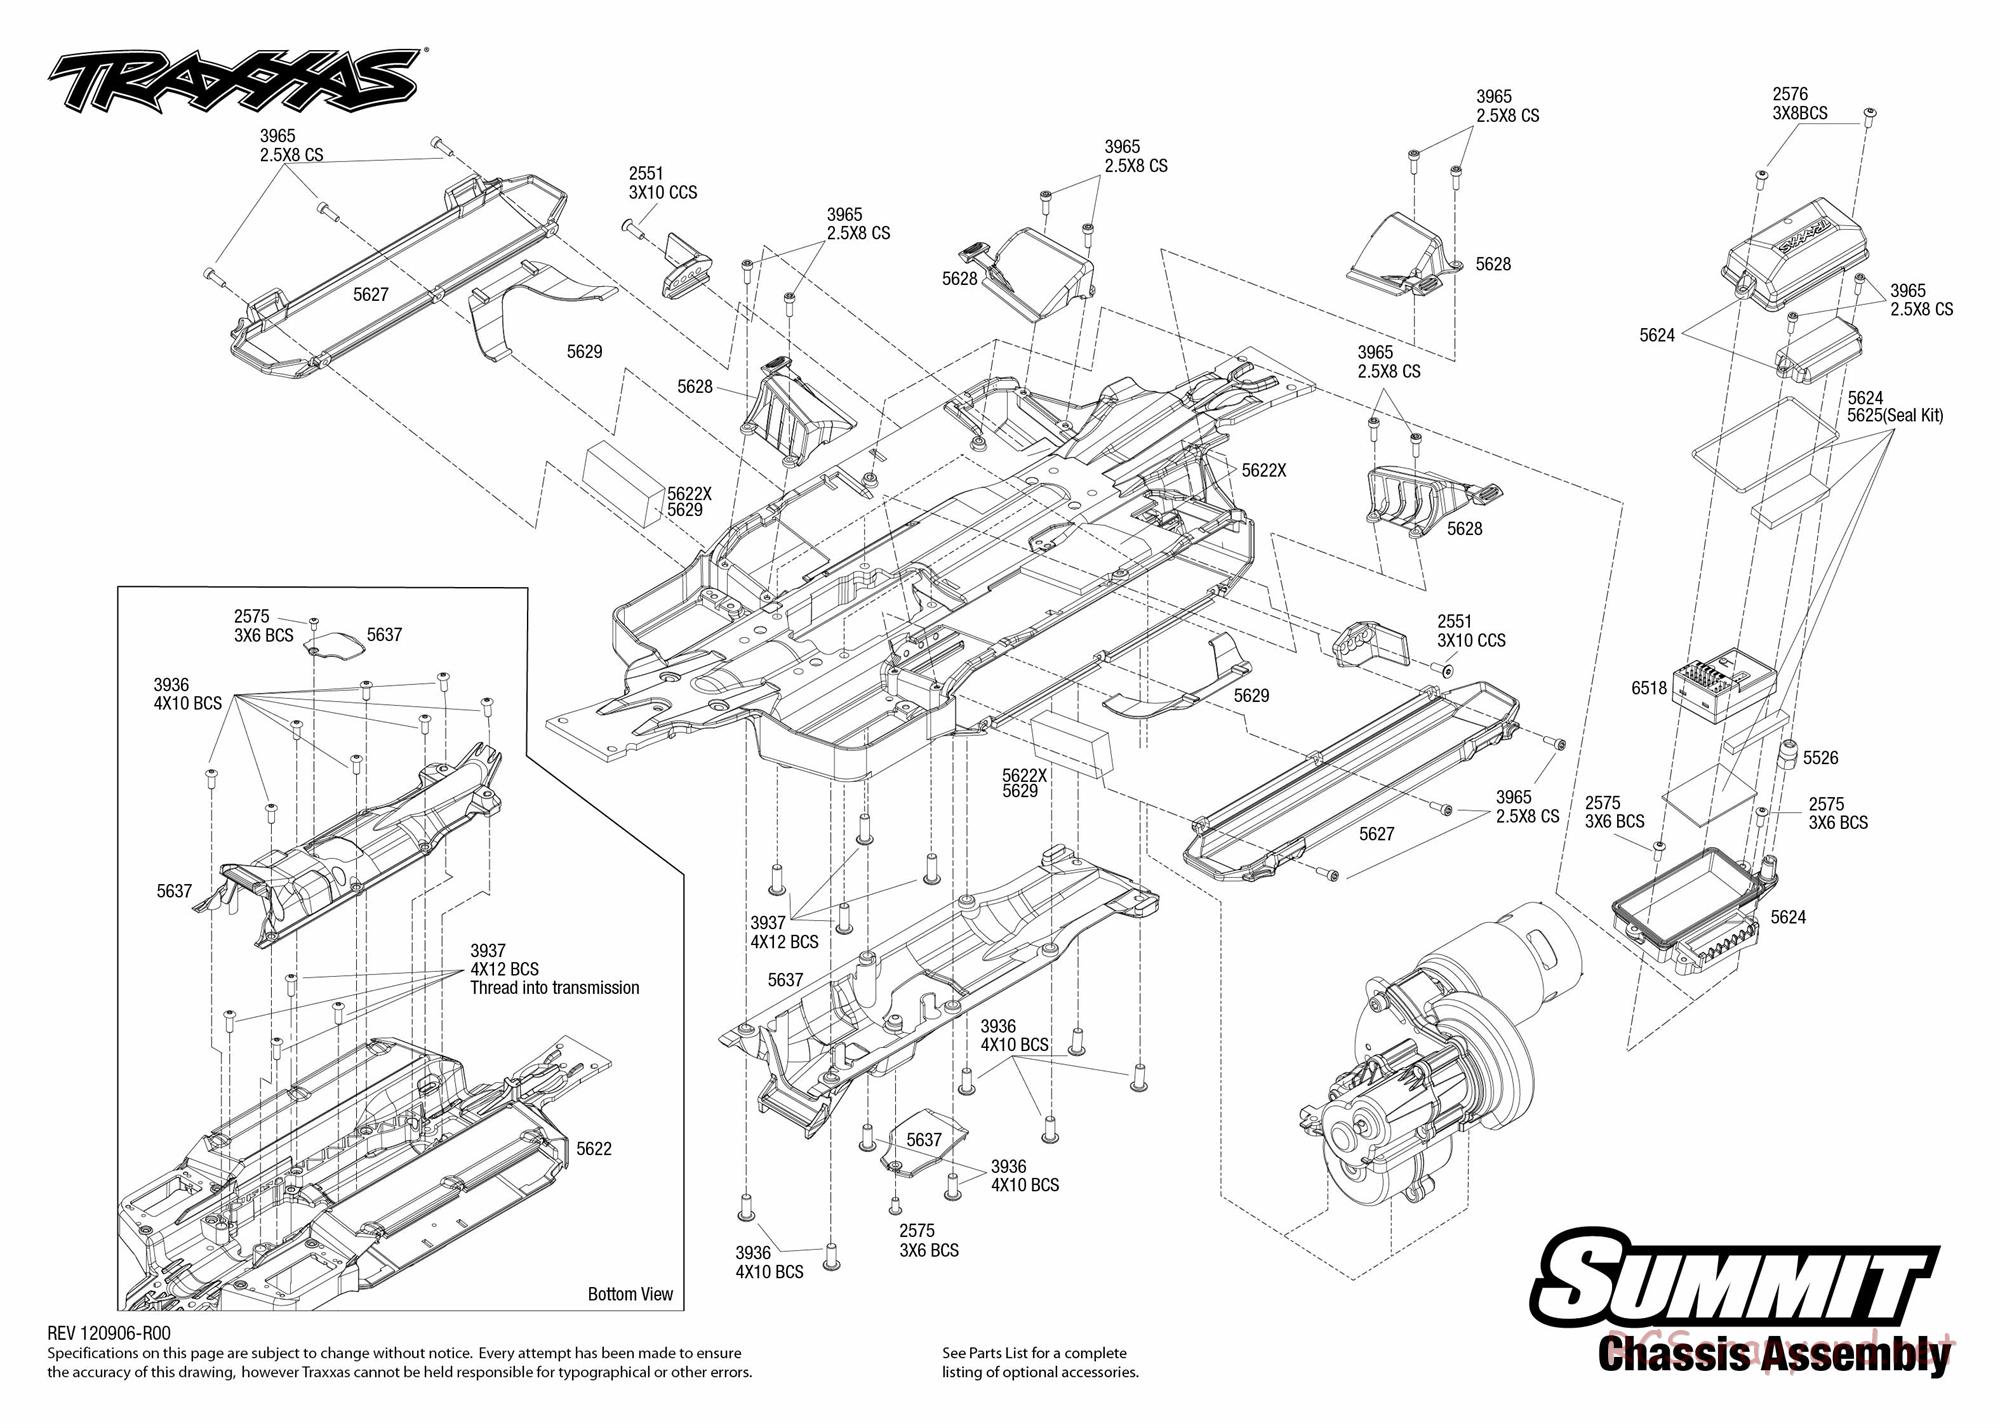 Traxxas - Summit LiPo (2012) - Exploded Views - Page 1